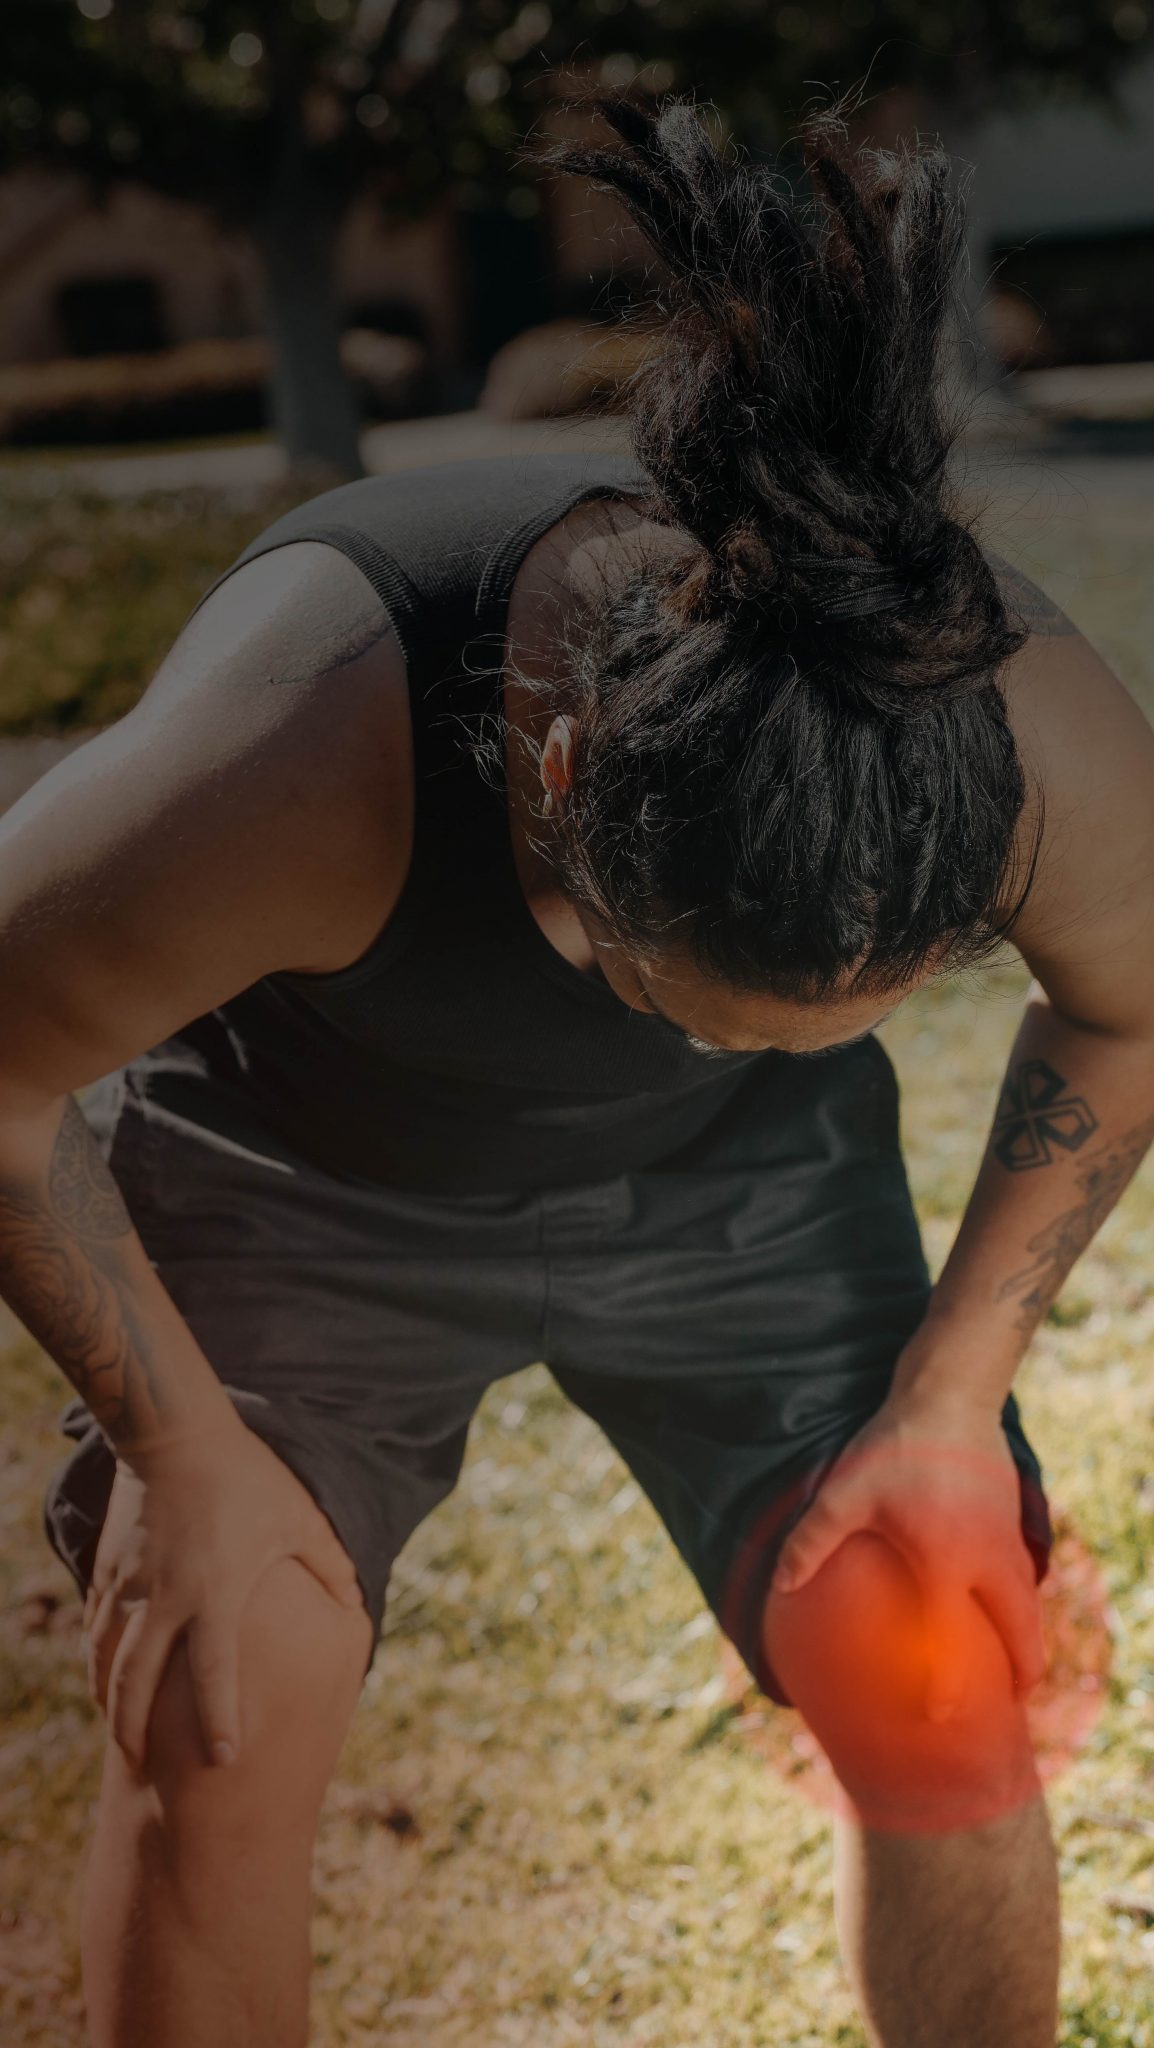 Image depicting a frustrated man holding his hurt knee due to joint pain, seeking relief through specialized training techniques for knee pain prevention. The hurt knee is highlited.